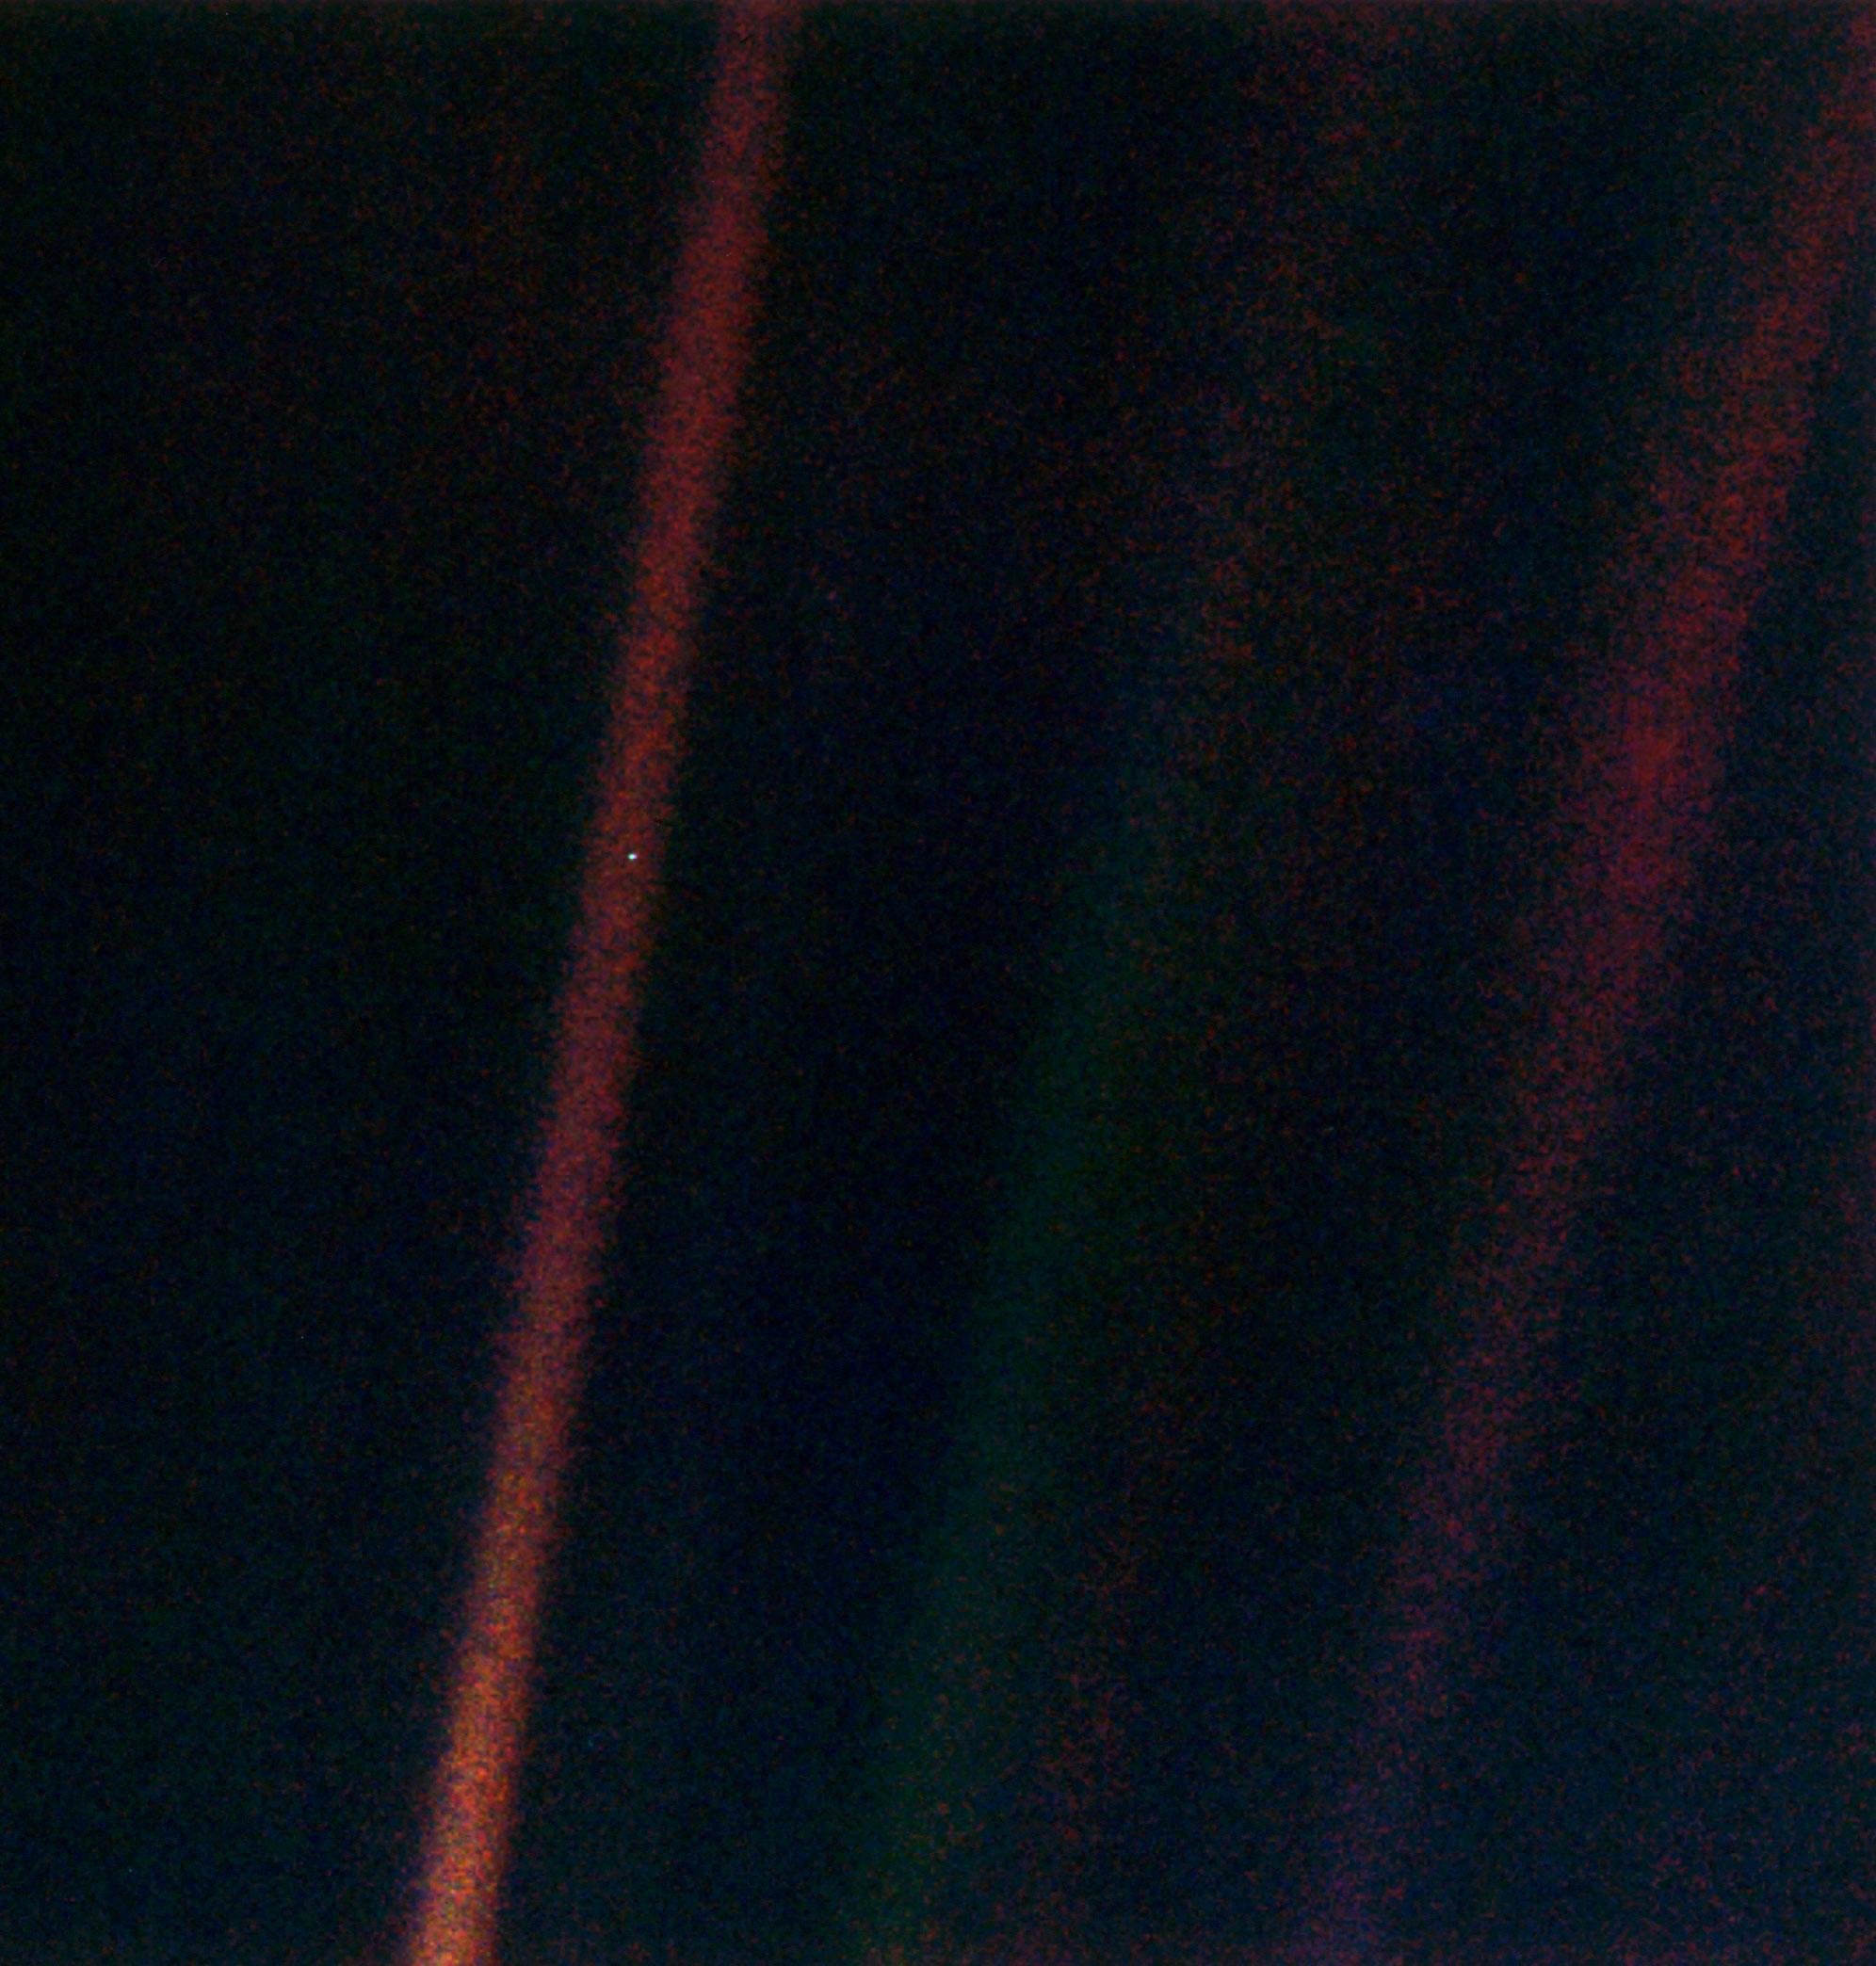 AstroAlert: NASA remasters the 'Pale Blue Dot photo of Earth - Lowell  Observatory